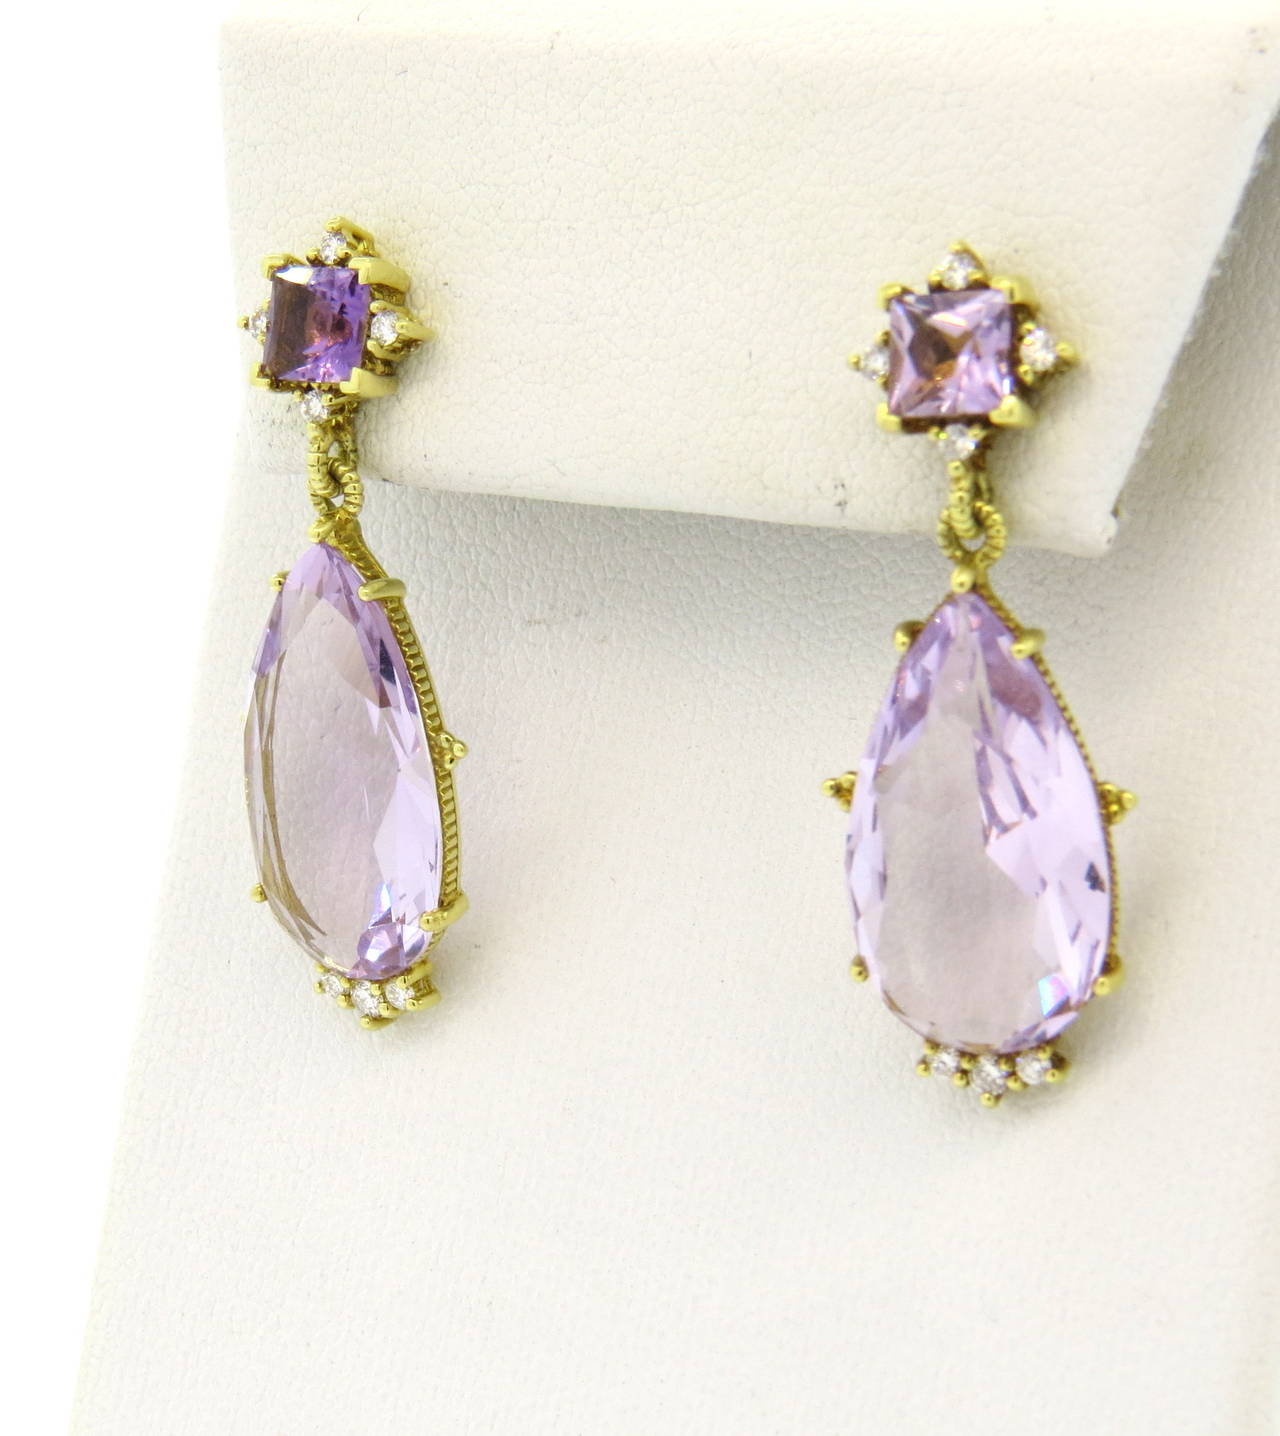 A pair of 18k yellow gold earrings set with approximately 0.16ctw of G/VS diamonds and faceted amethyst.  Crafted by Judith Ripka, the earrings measure 37mm x 13mm and weigh 7.9 grams. Marked: JR, 18k